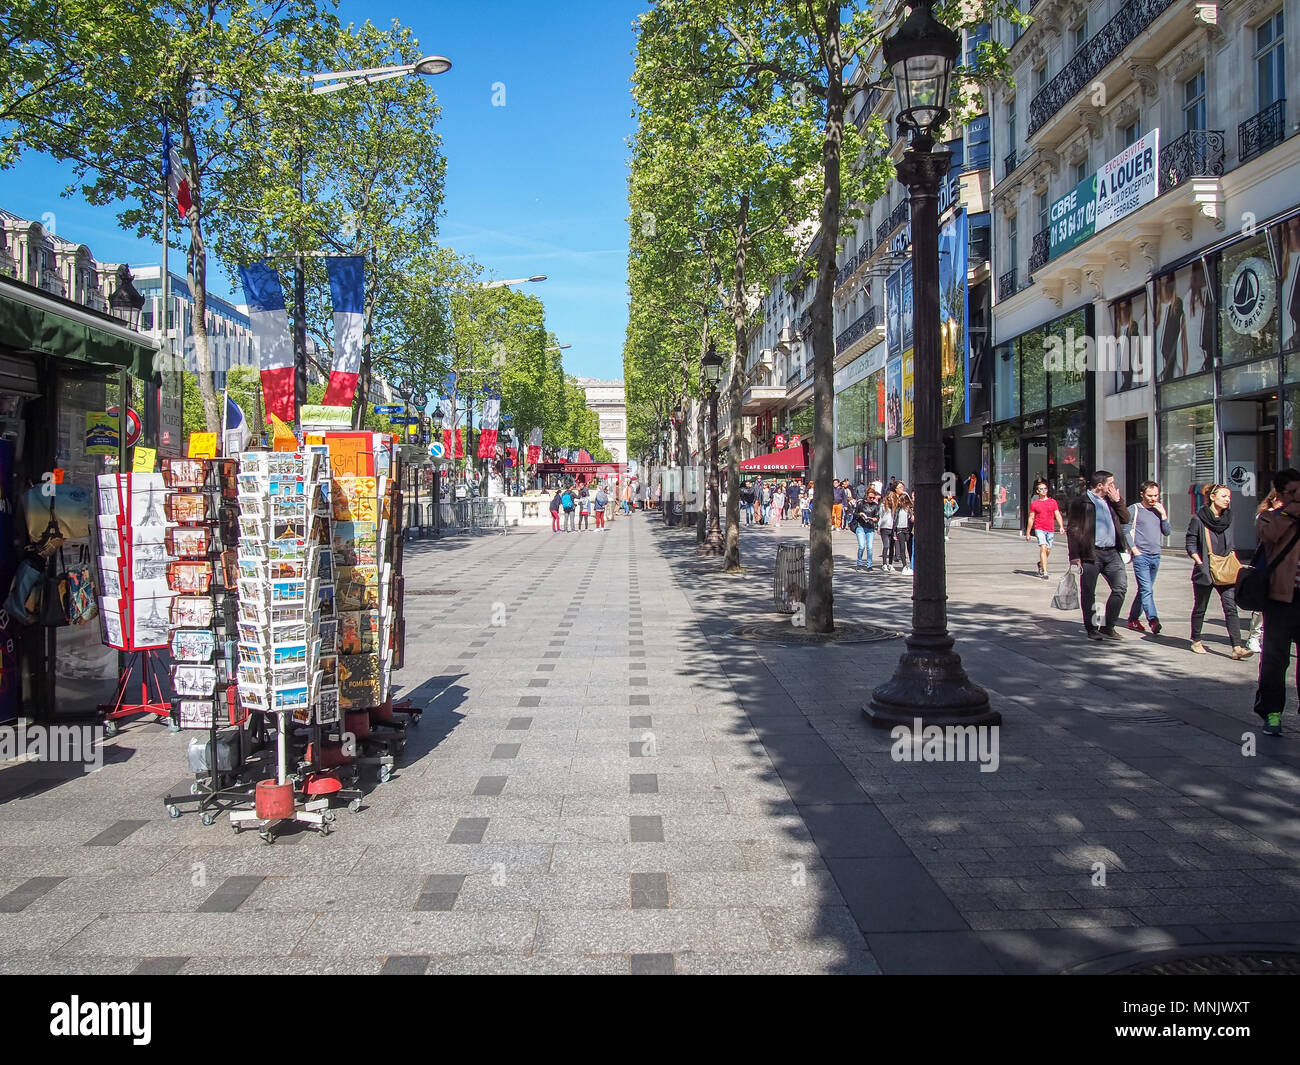 People shopping on the famous street the Avenue des Champs Elysees